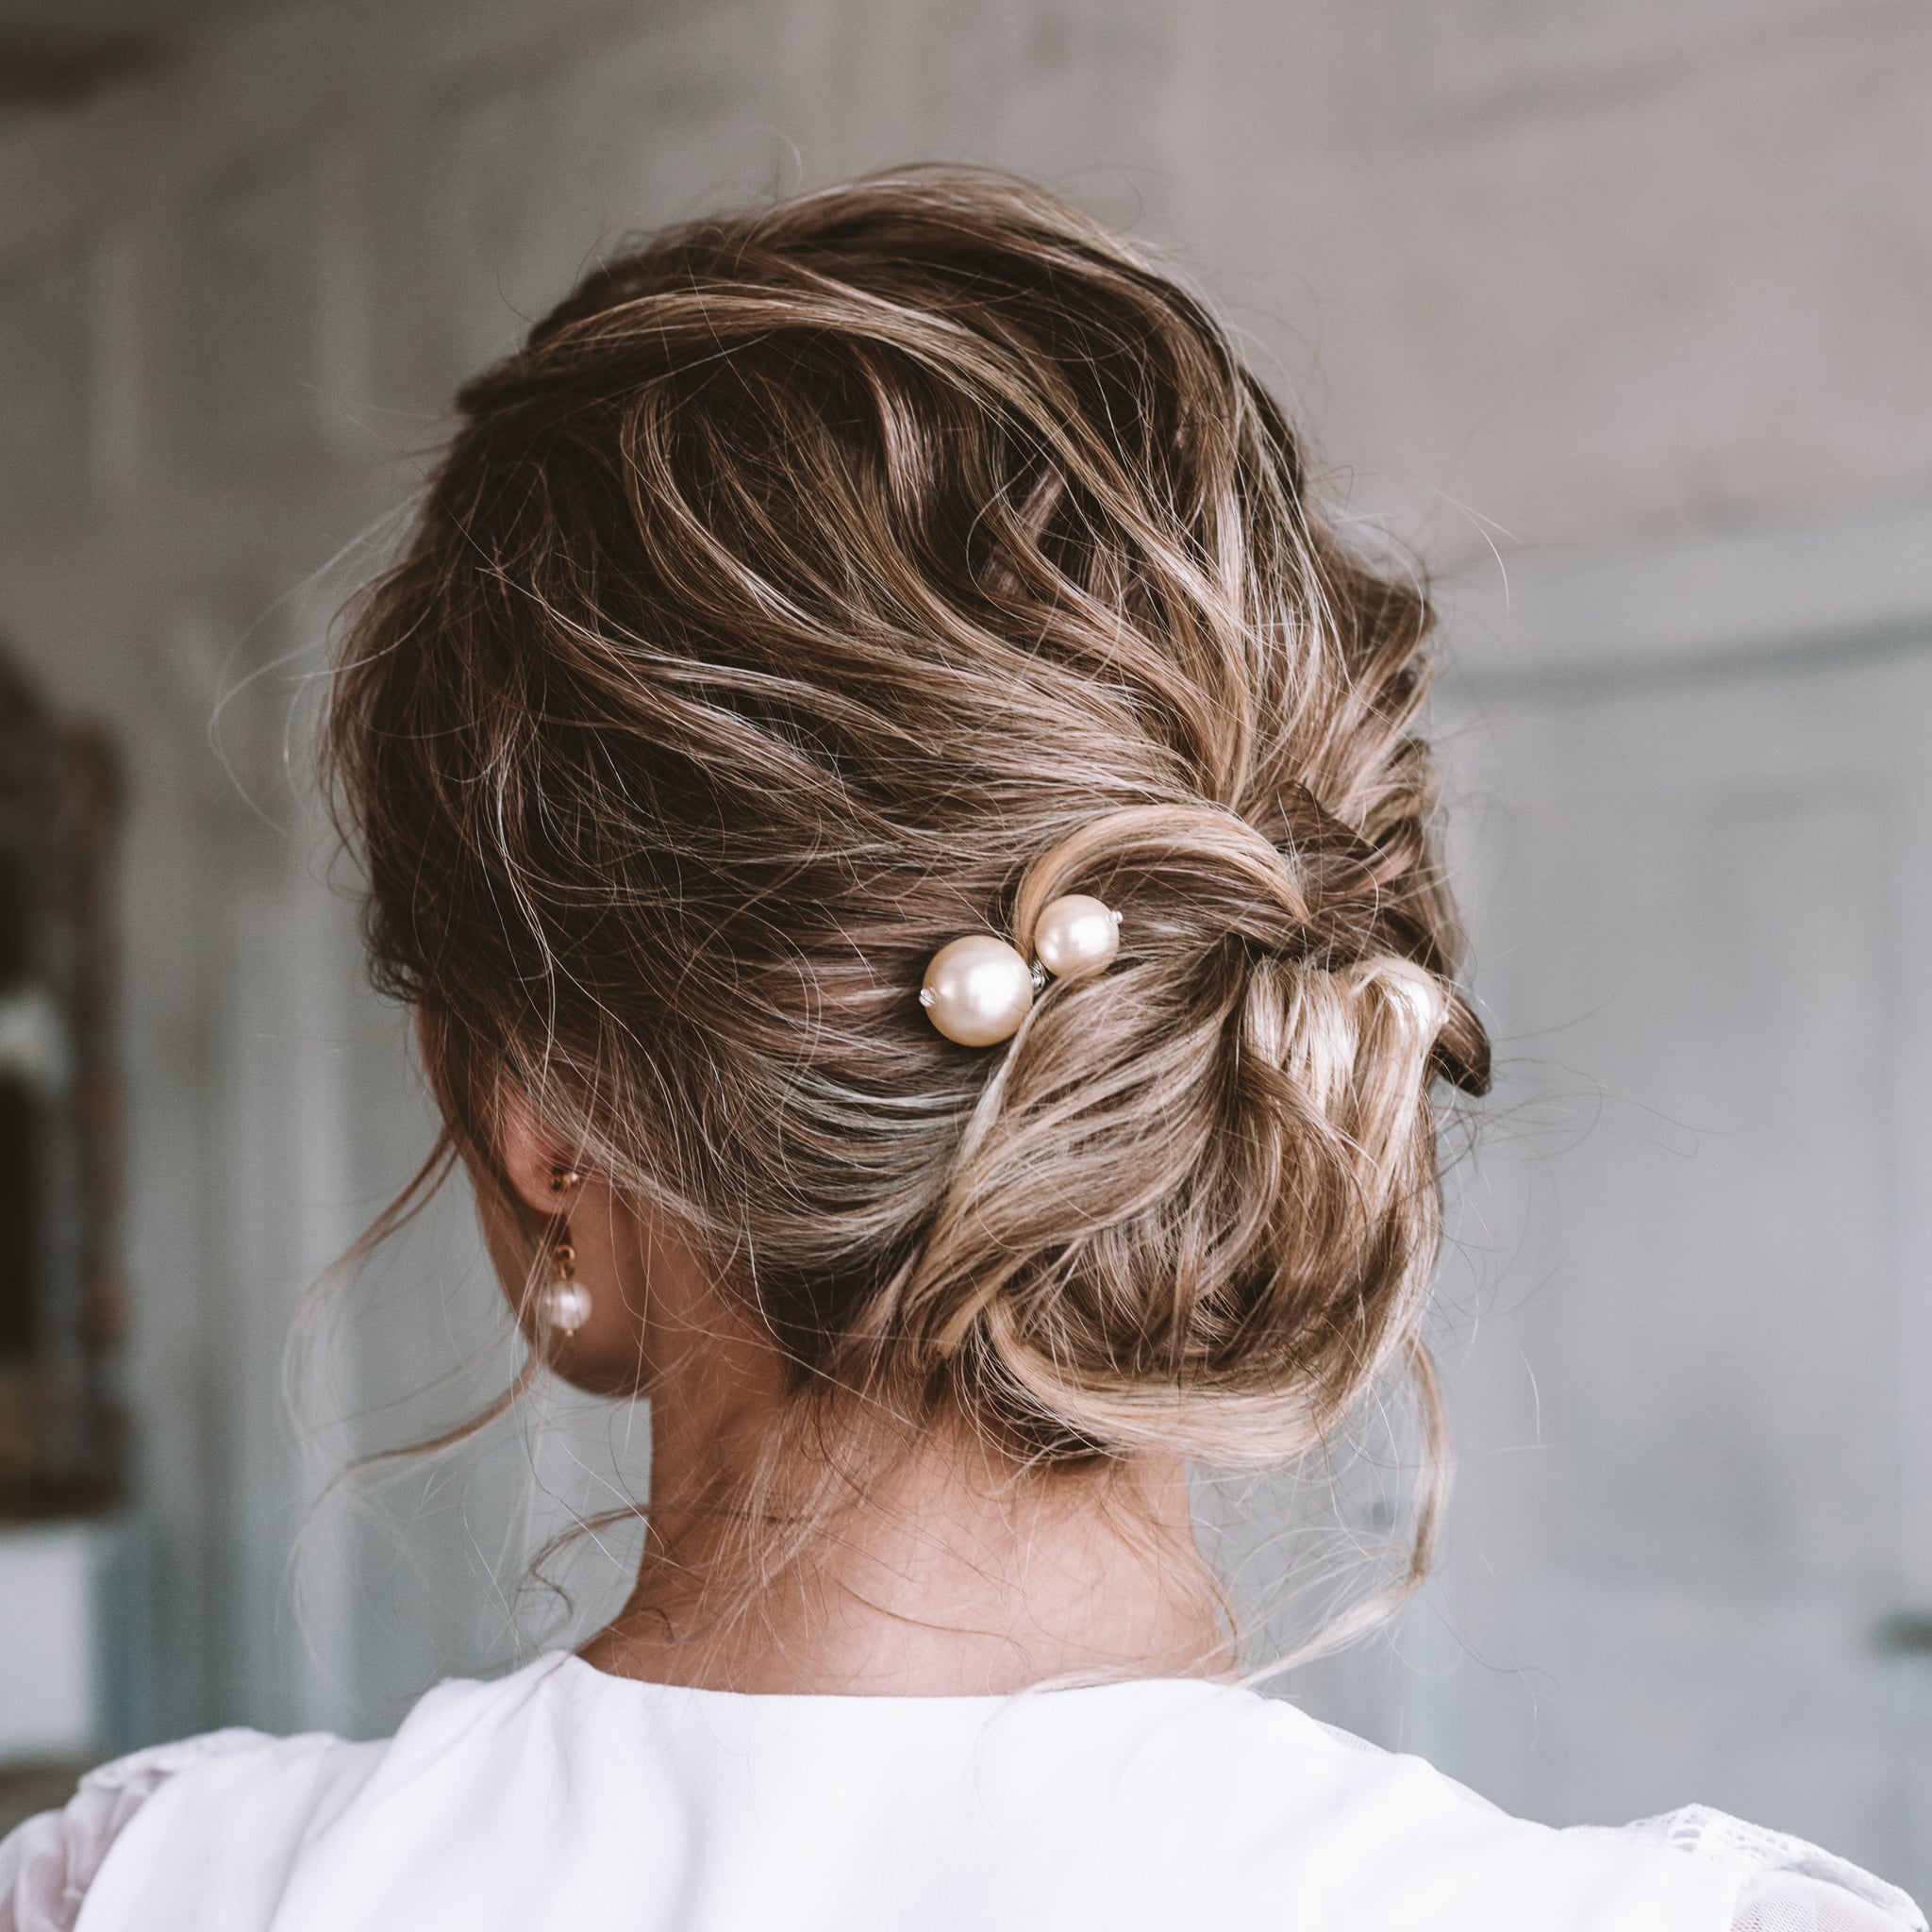 35 Different Bun Hairstyles That are Easy to Make  Styles At Life